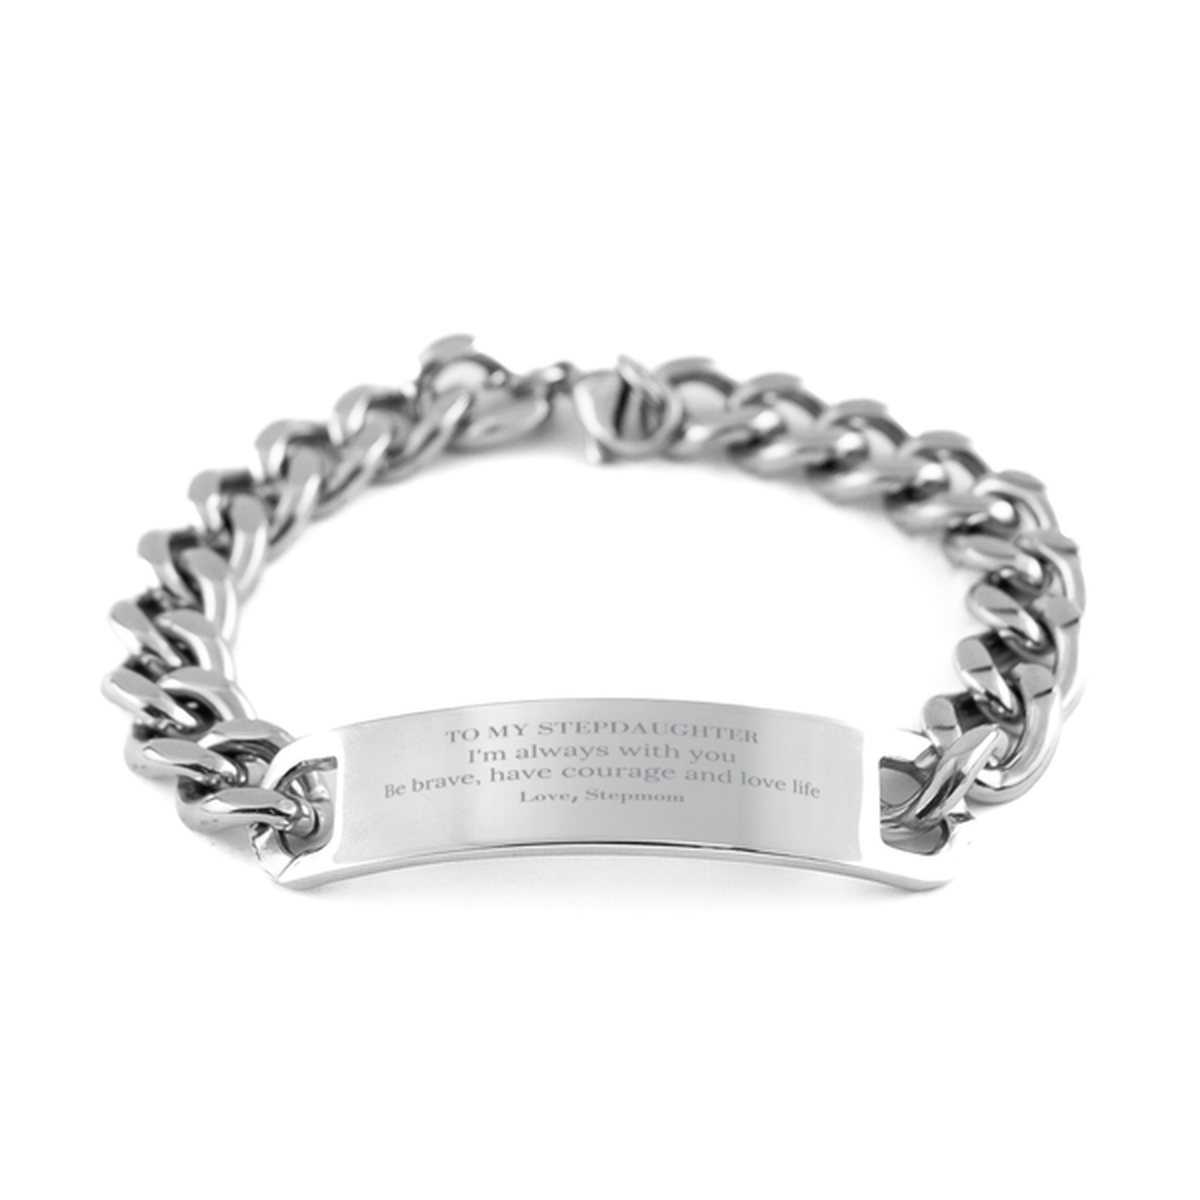 To My Stepdaughter Gifts from Stepmom, Unique Cuban Chain Stainless Steel Bracelet Inspirational Christmas Birthday Graduation Gifts for Stepdaughter I'm always with you. Be brave, have courage and love life. Love, Stepmom